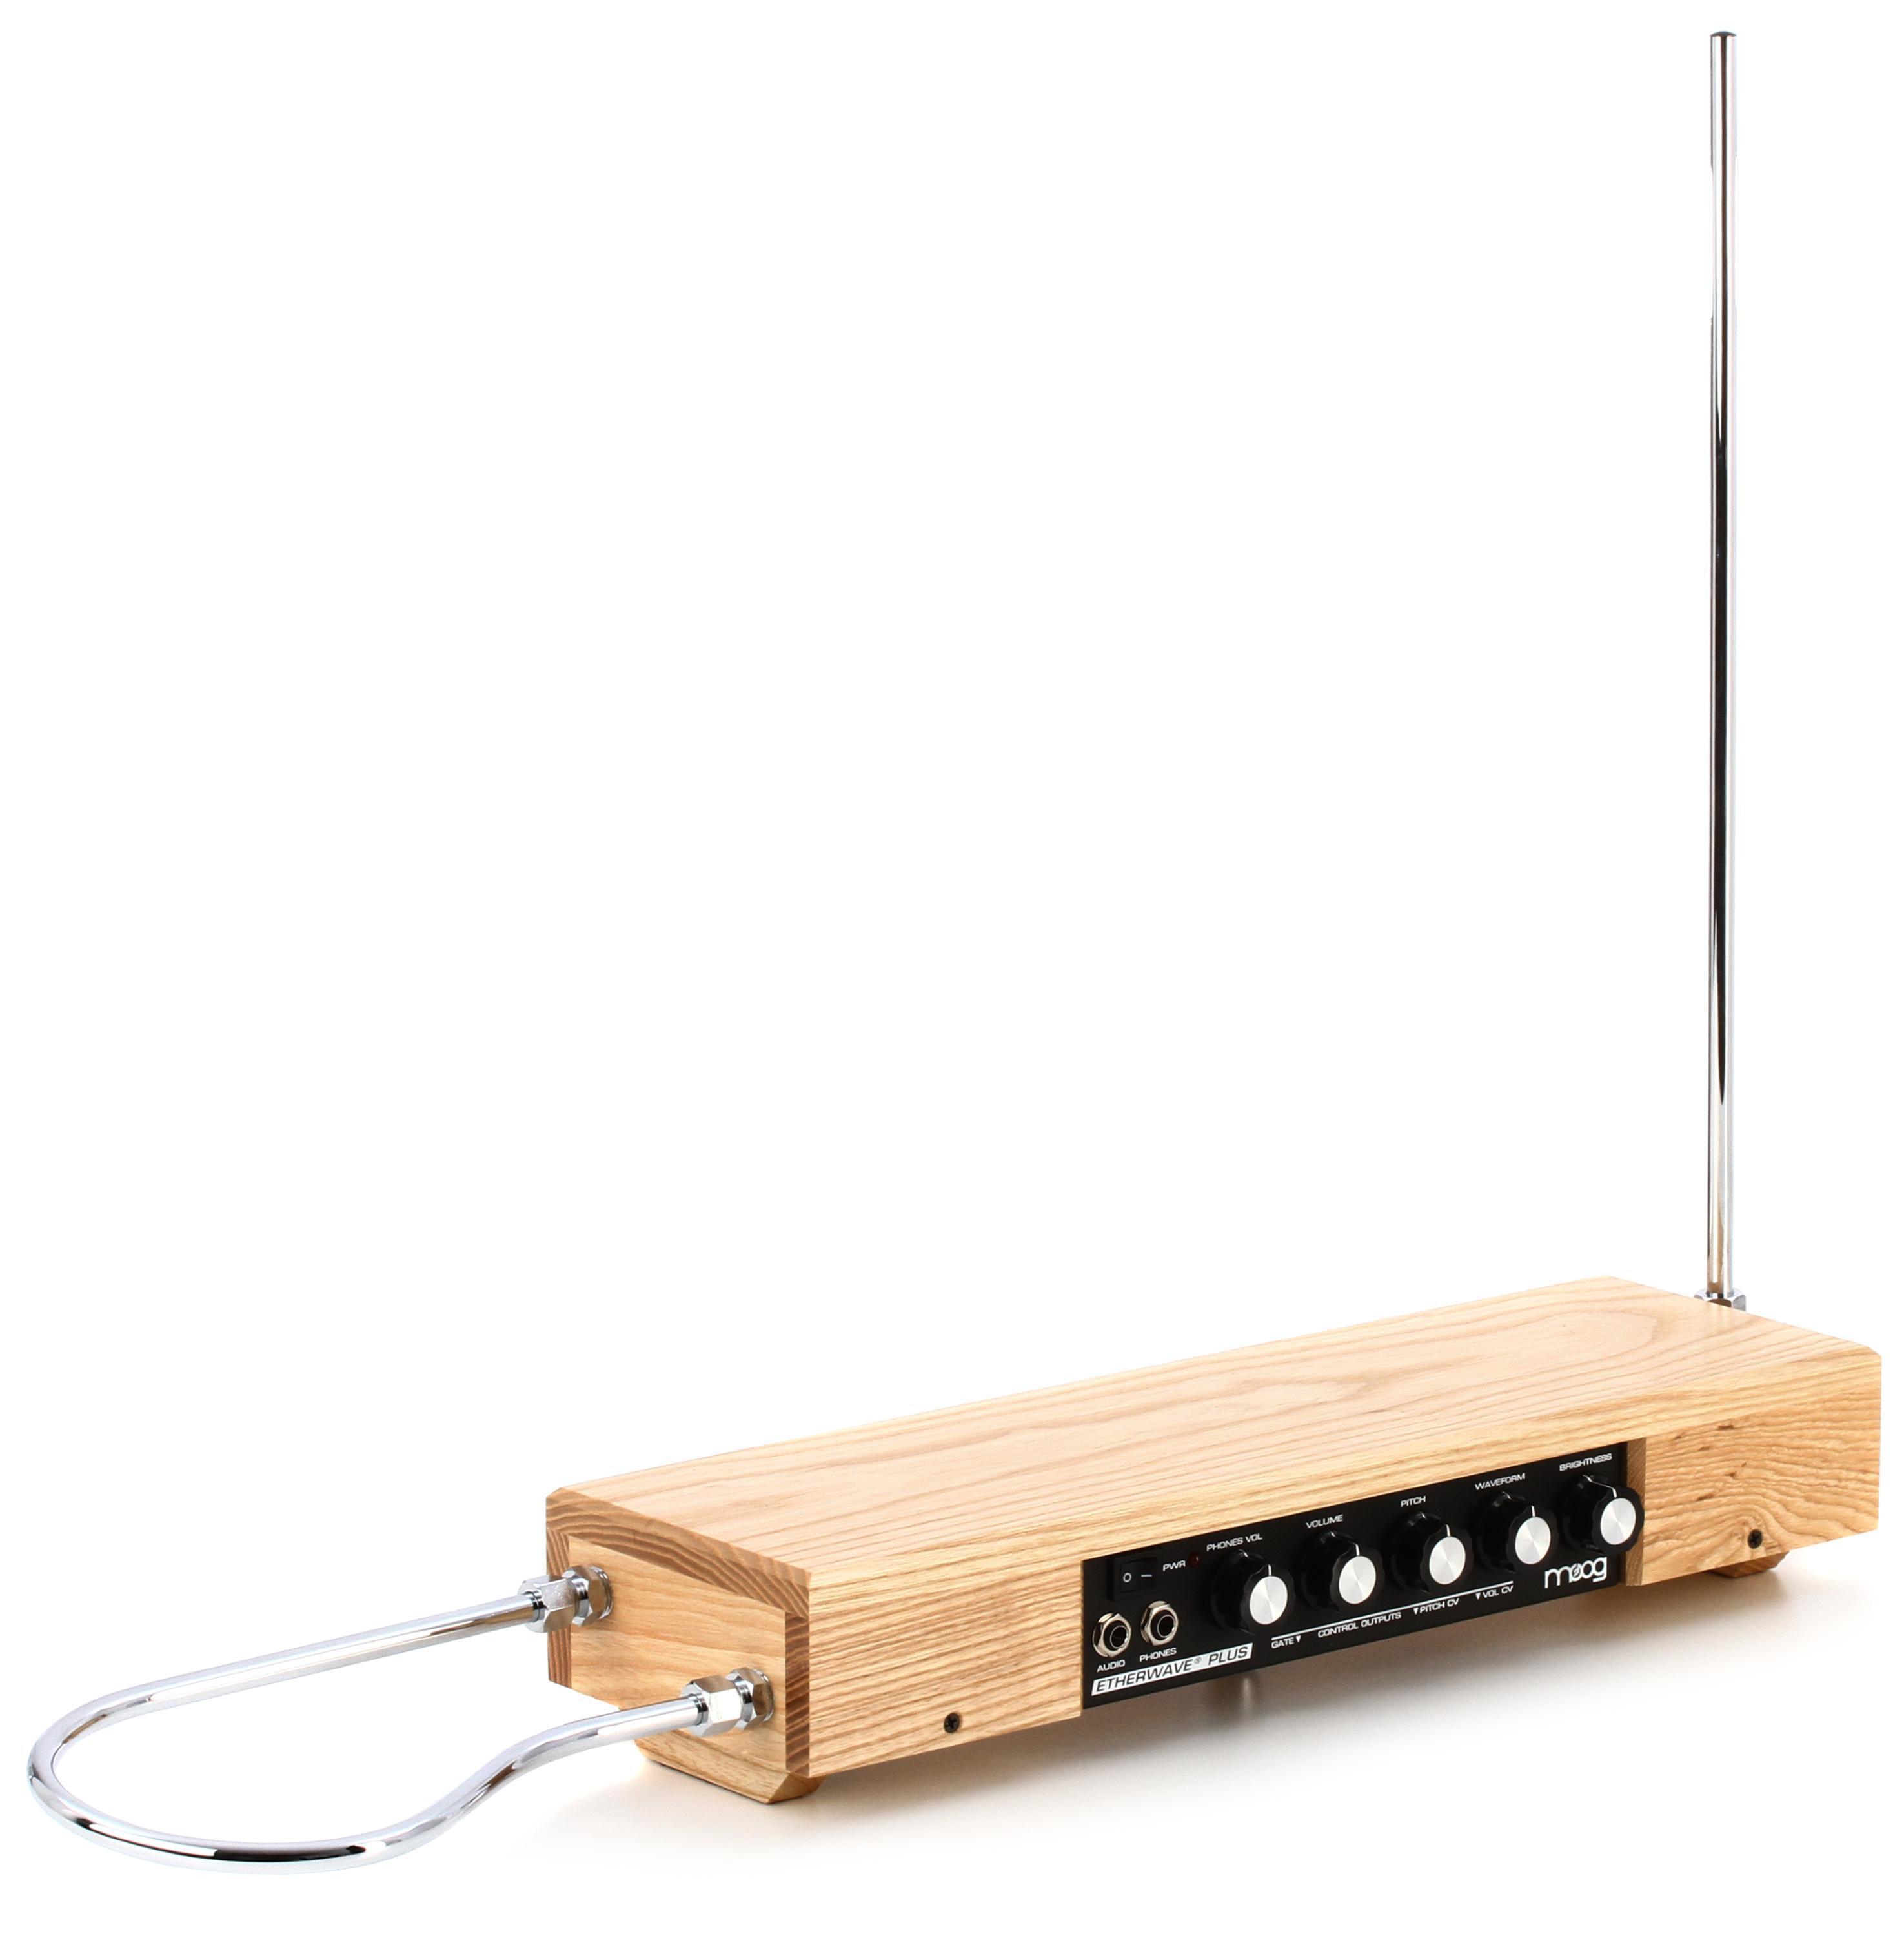 A New Theremin, a New Way to Learn, a New Way to Work Together